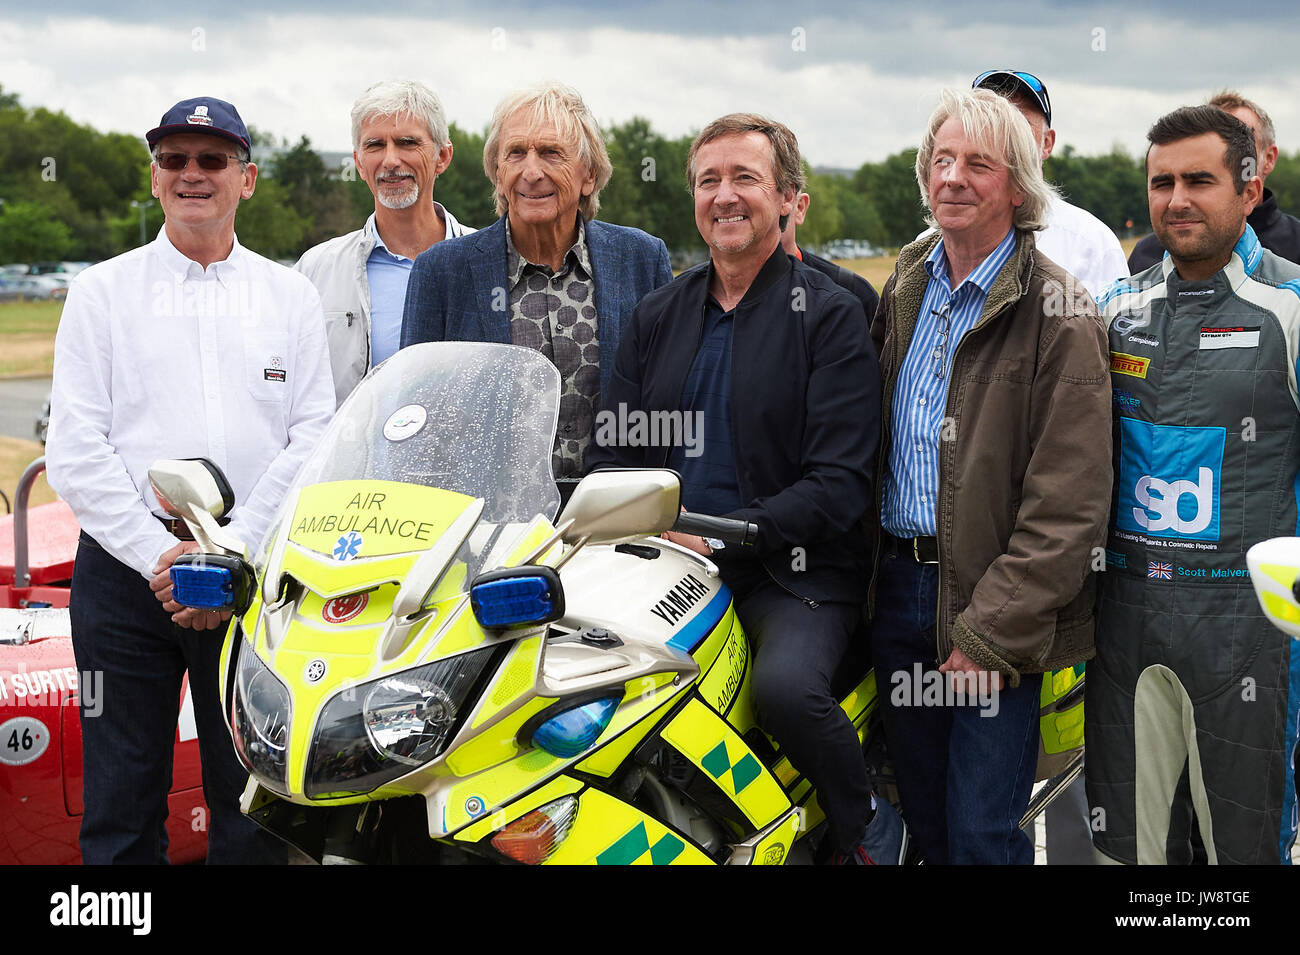 Celebrities of the moto sports world attend a photo call for the Henry Surtees Foundation  Featuring: Damon Hill, Freddie Spencer, Derek Bell Where: Weybridge, United Kingdom When: 11 Jul 2017 Credit: Alan West/WENN.com Stock Photo